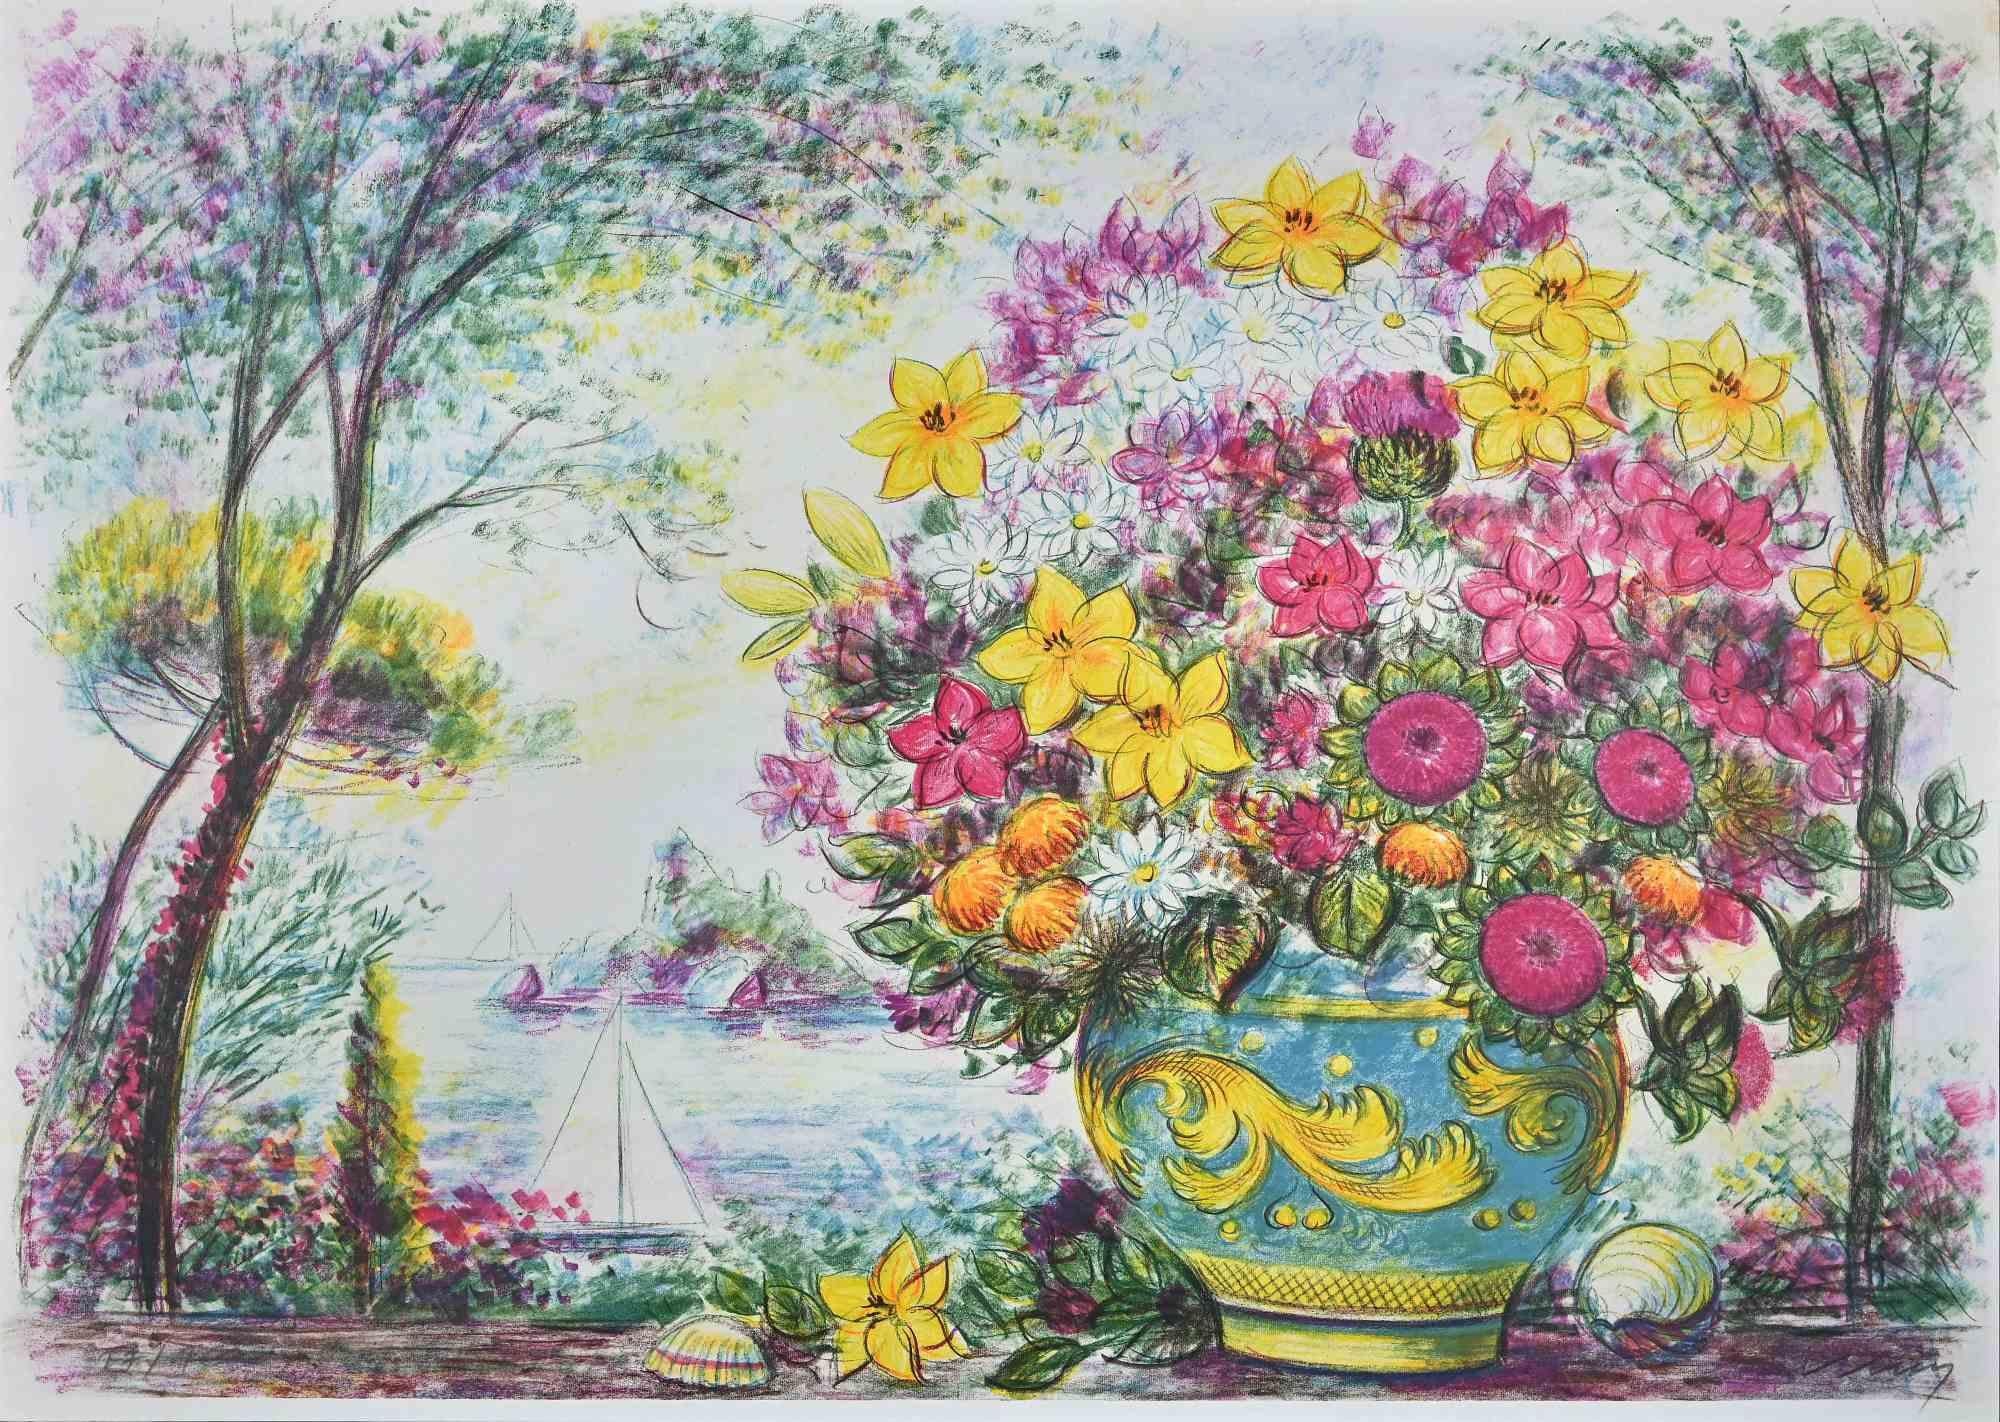 Flowerpot is a beautiful colored lithograph on paper, realized in 1988 by the artist  Jovan Vulic  (b. 1951).

Hand-signed and numbered in pencil on the lower margin. Edition of 150 prints.

This contemporary artwork represents with poetic style a